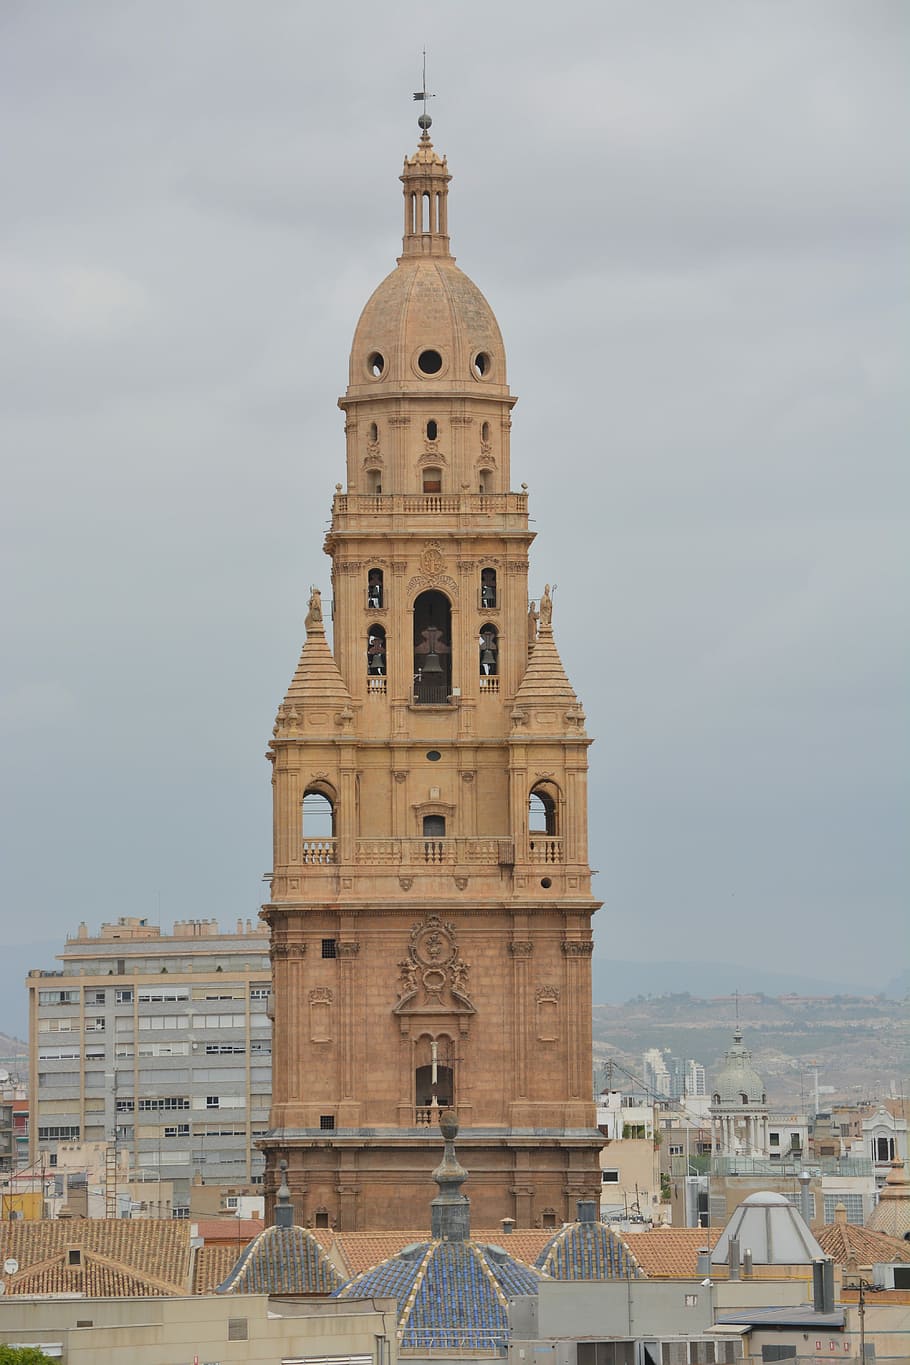 Cathedral, Murcia, Tower, tower cathedral, spain, architecture, church, bell tower, christianity, history